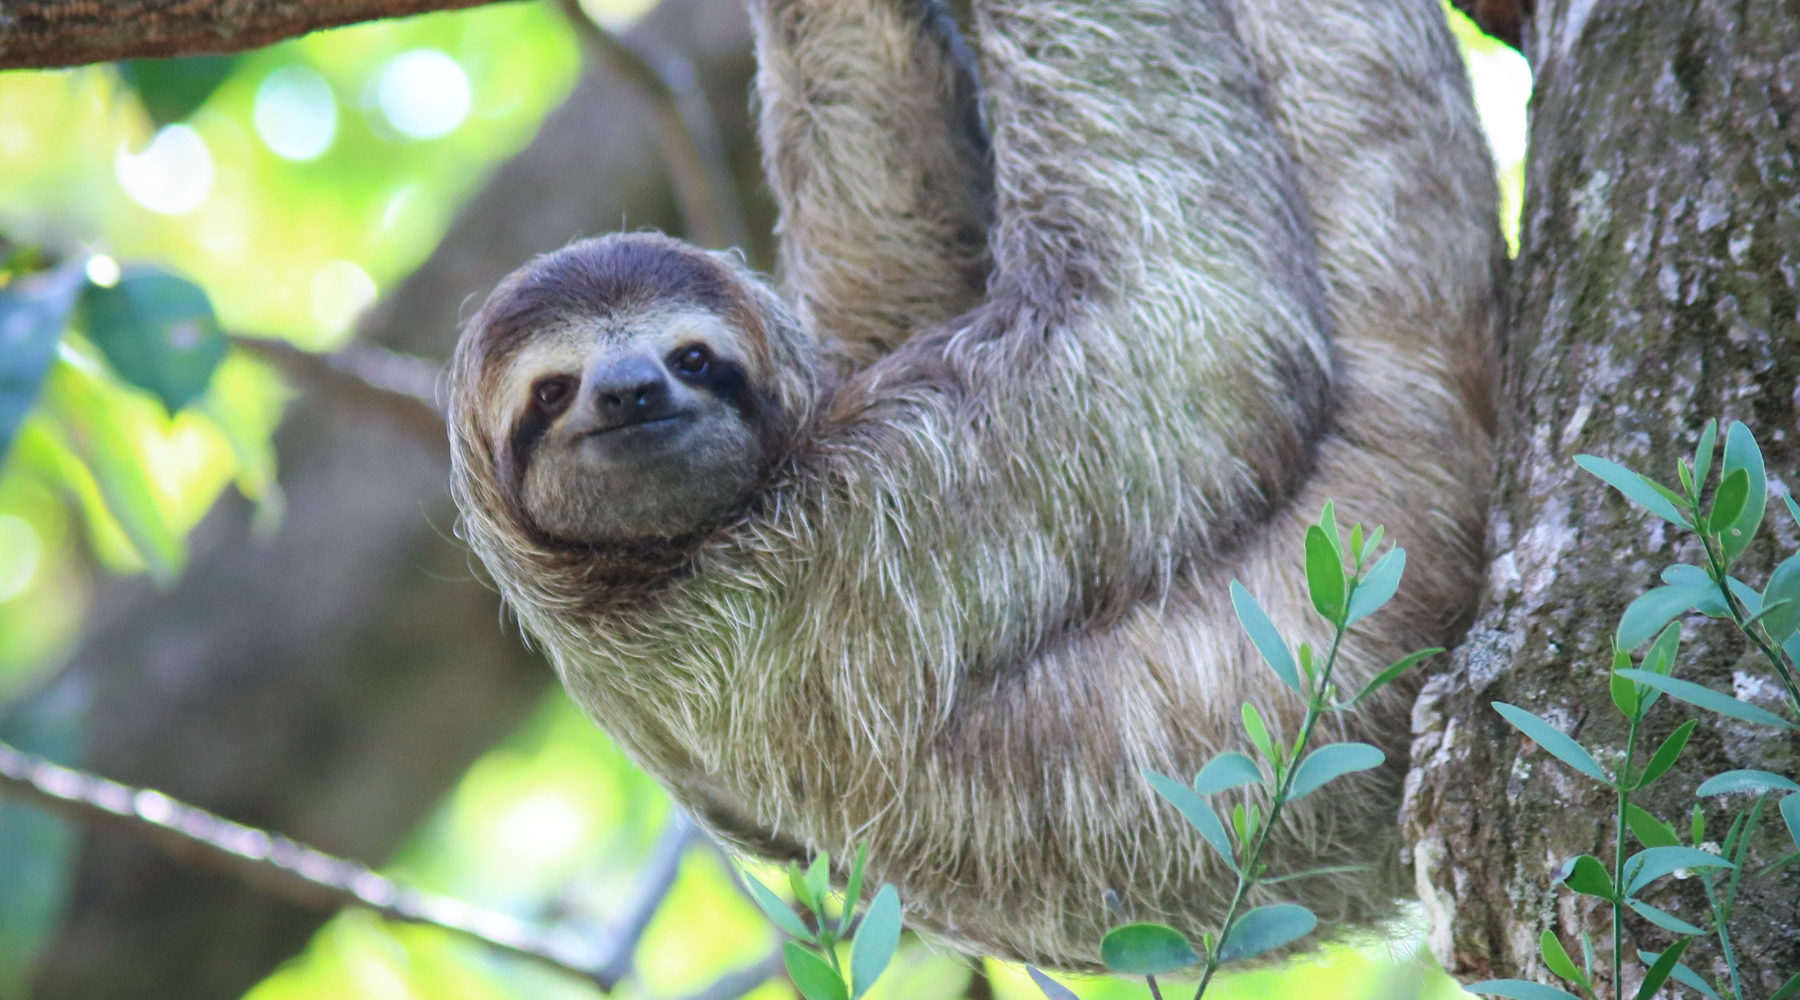 Endangered pygmy three-toed sloth hanging from tree